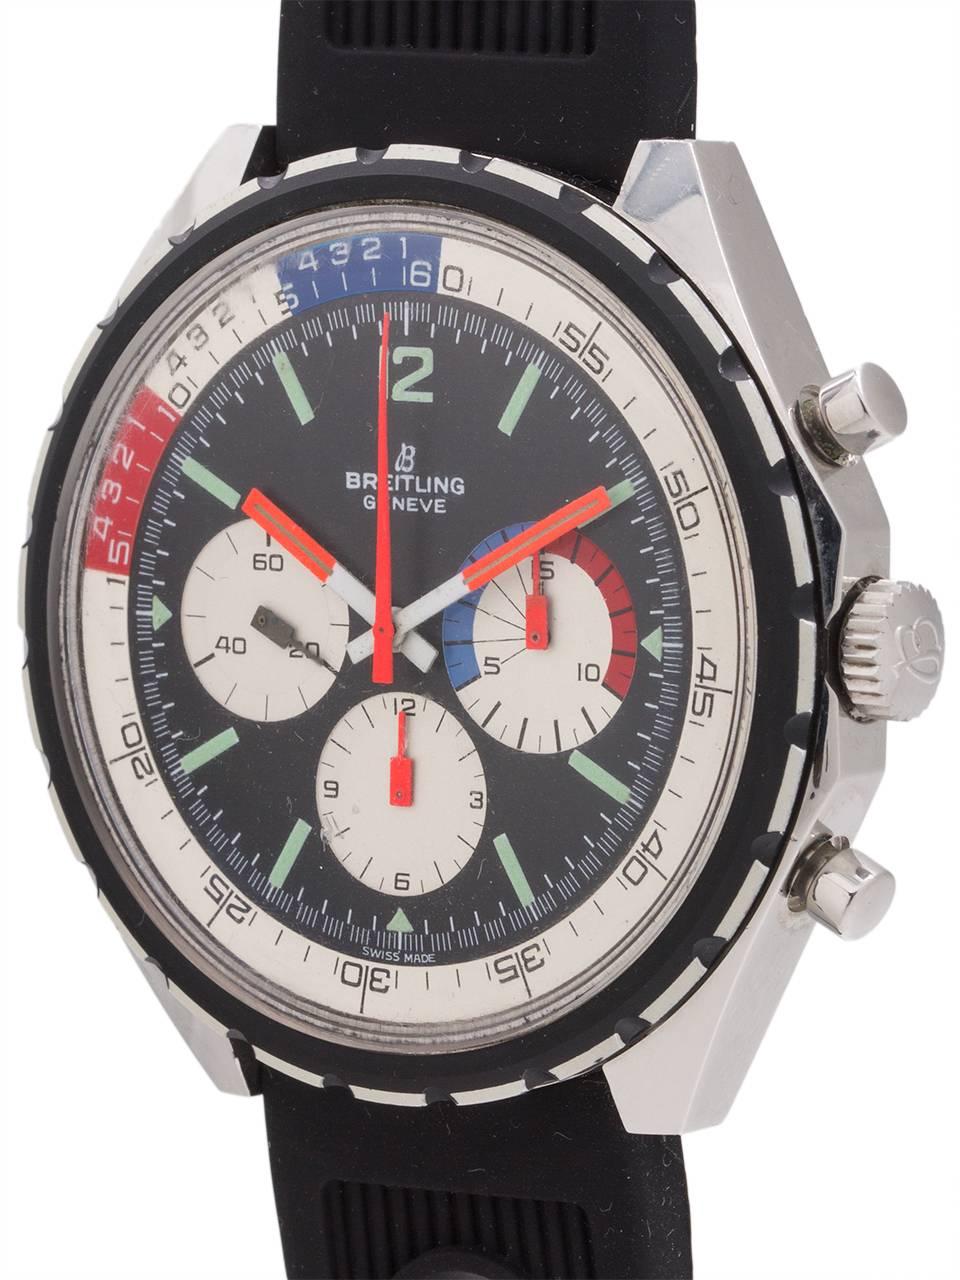 An exceptional condition example Breitling Co-Pilot Yachting Chronograph ref 7652 circa 1970’s. A striking, oversize 47mm diameter case model with exceptional condition case, bezel, dial, and movement. Powered by Venus calibre 178, 3 registers